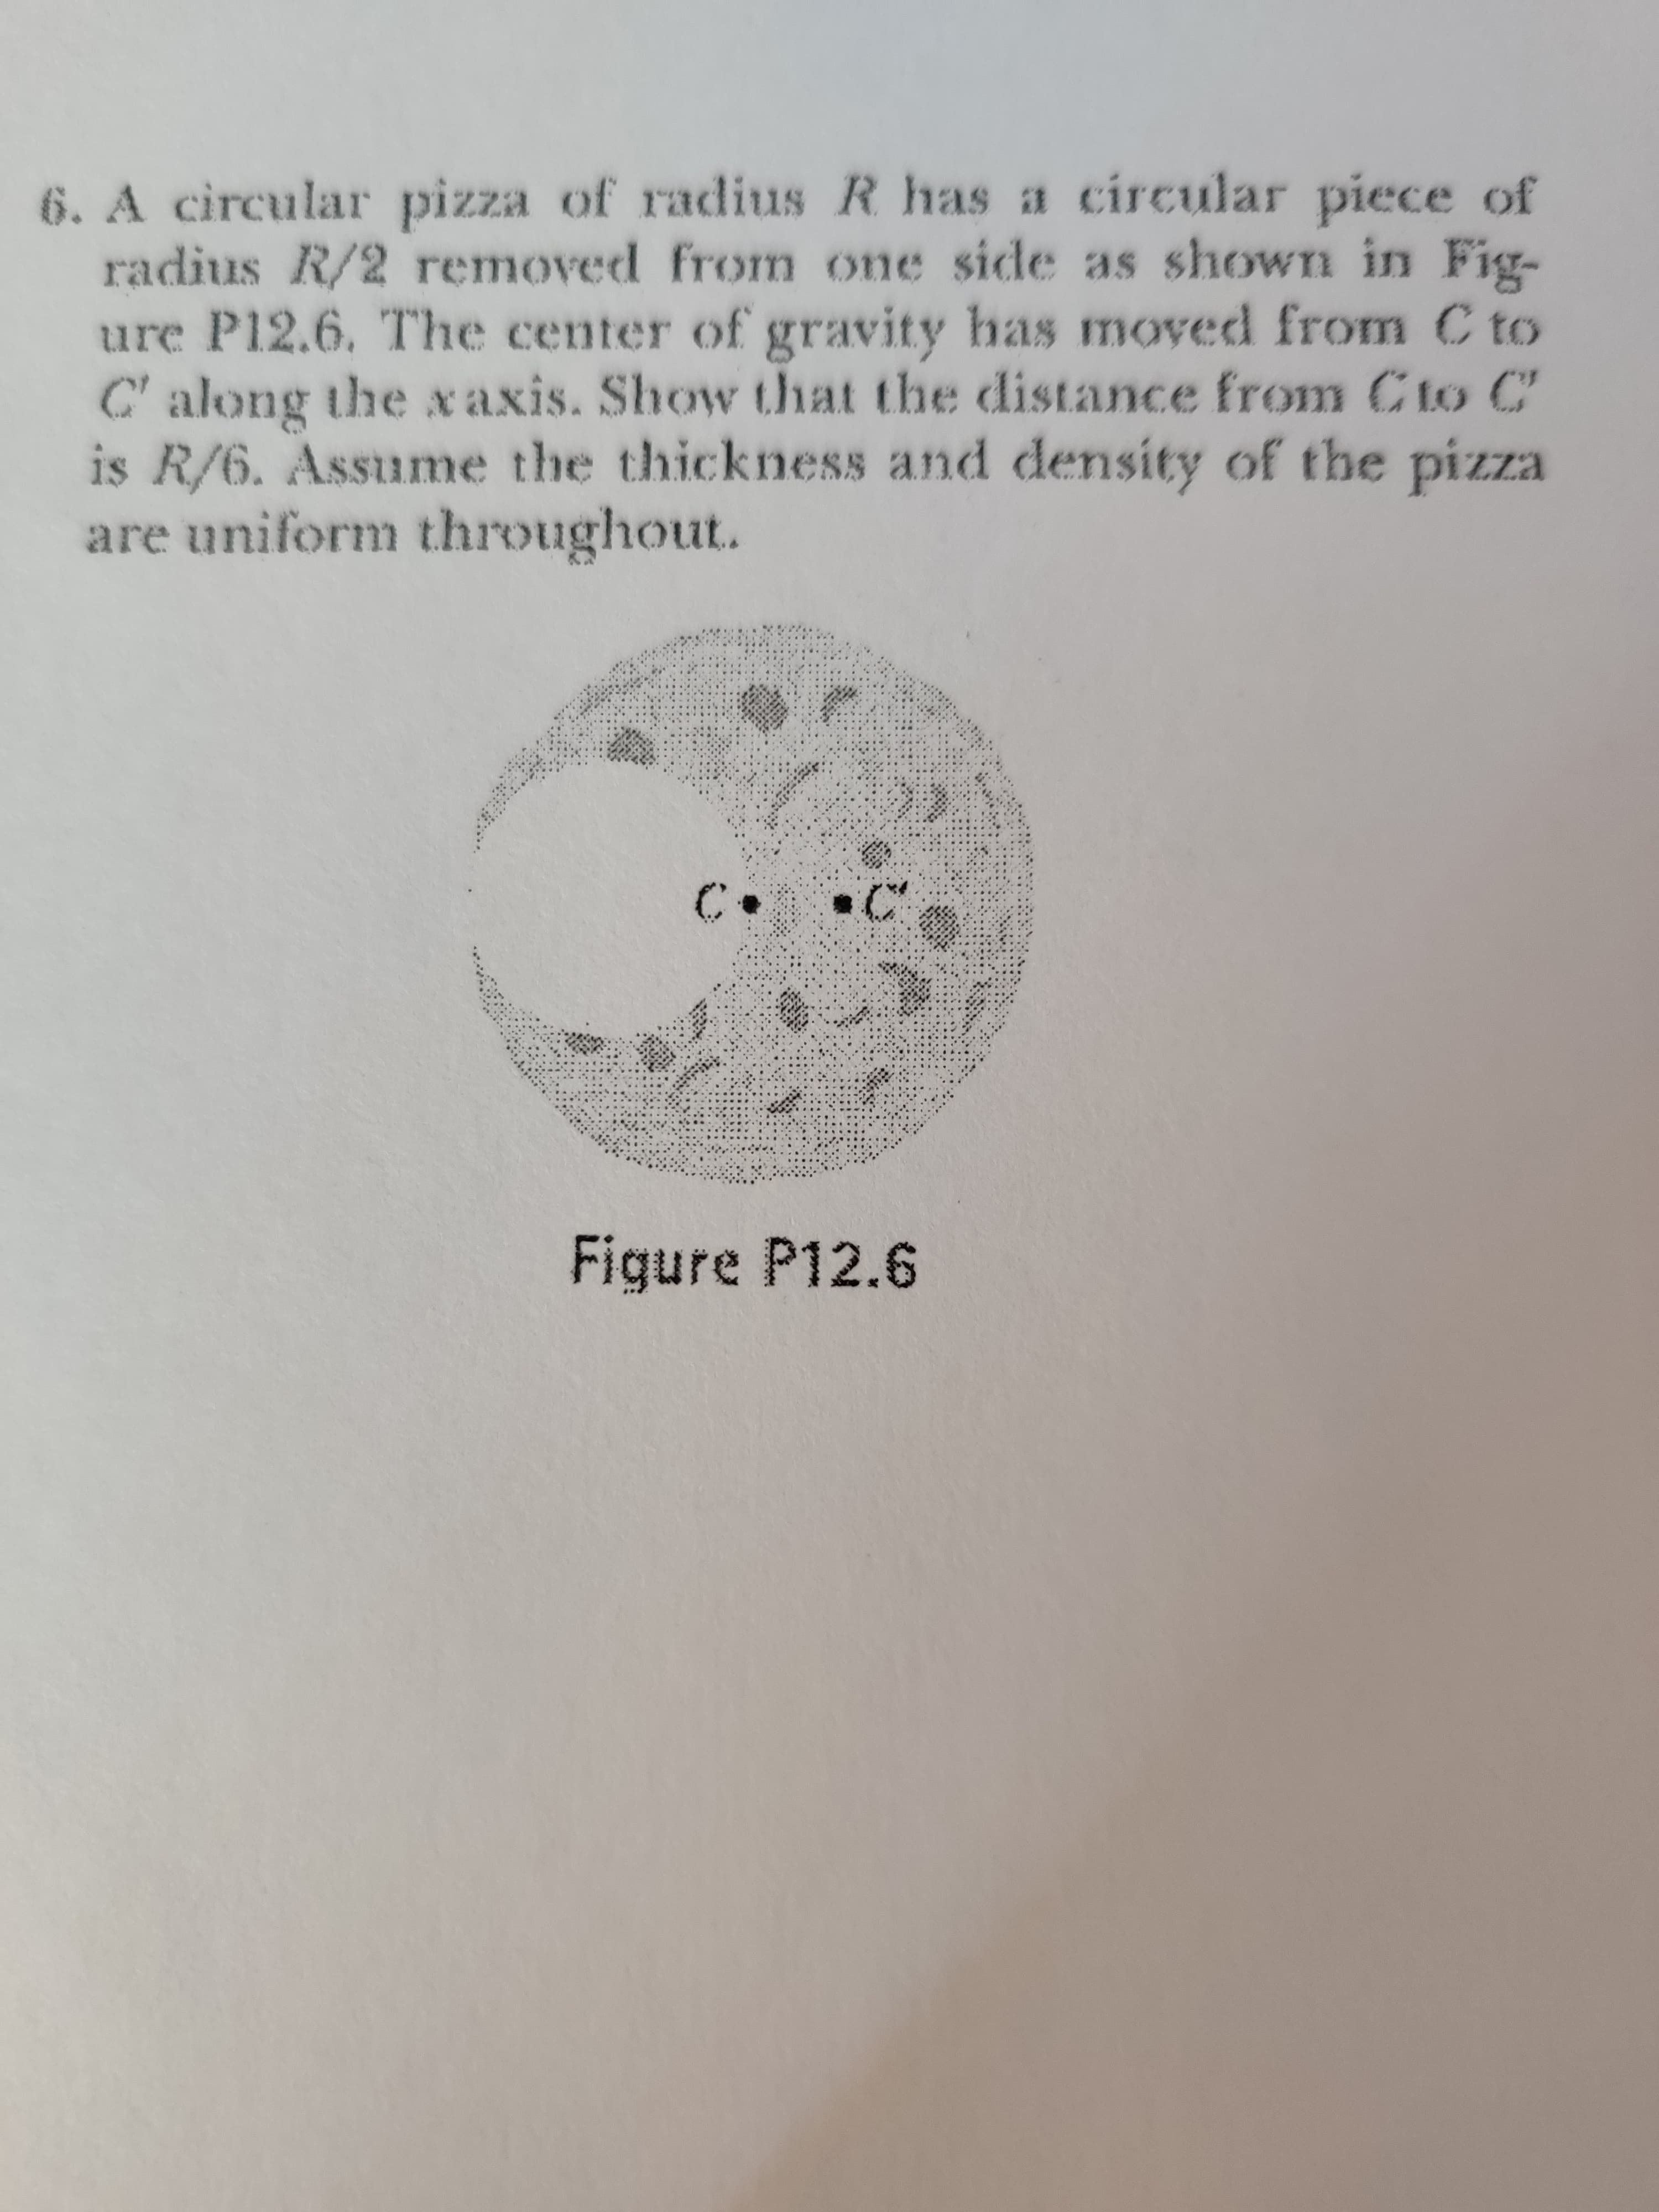 6. A circular pizza of radius R has i# circular piece of
radius R/2 removed from one side as shown in Fig-
ure P12.6. The center of gravity has moved from C to
C'along the xaxis. Show that the distance from C to C
is R/6. Assume the thickness and density of the pizza
are uniform throughout.
EZzid
C.
Figure P12.6
